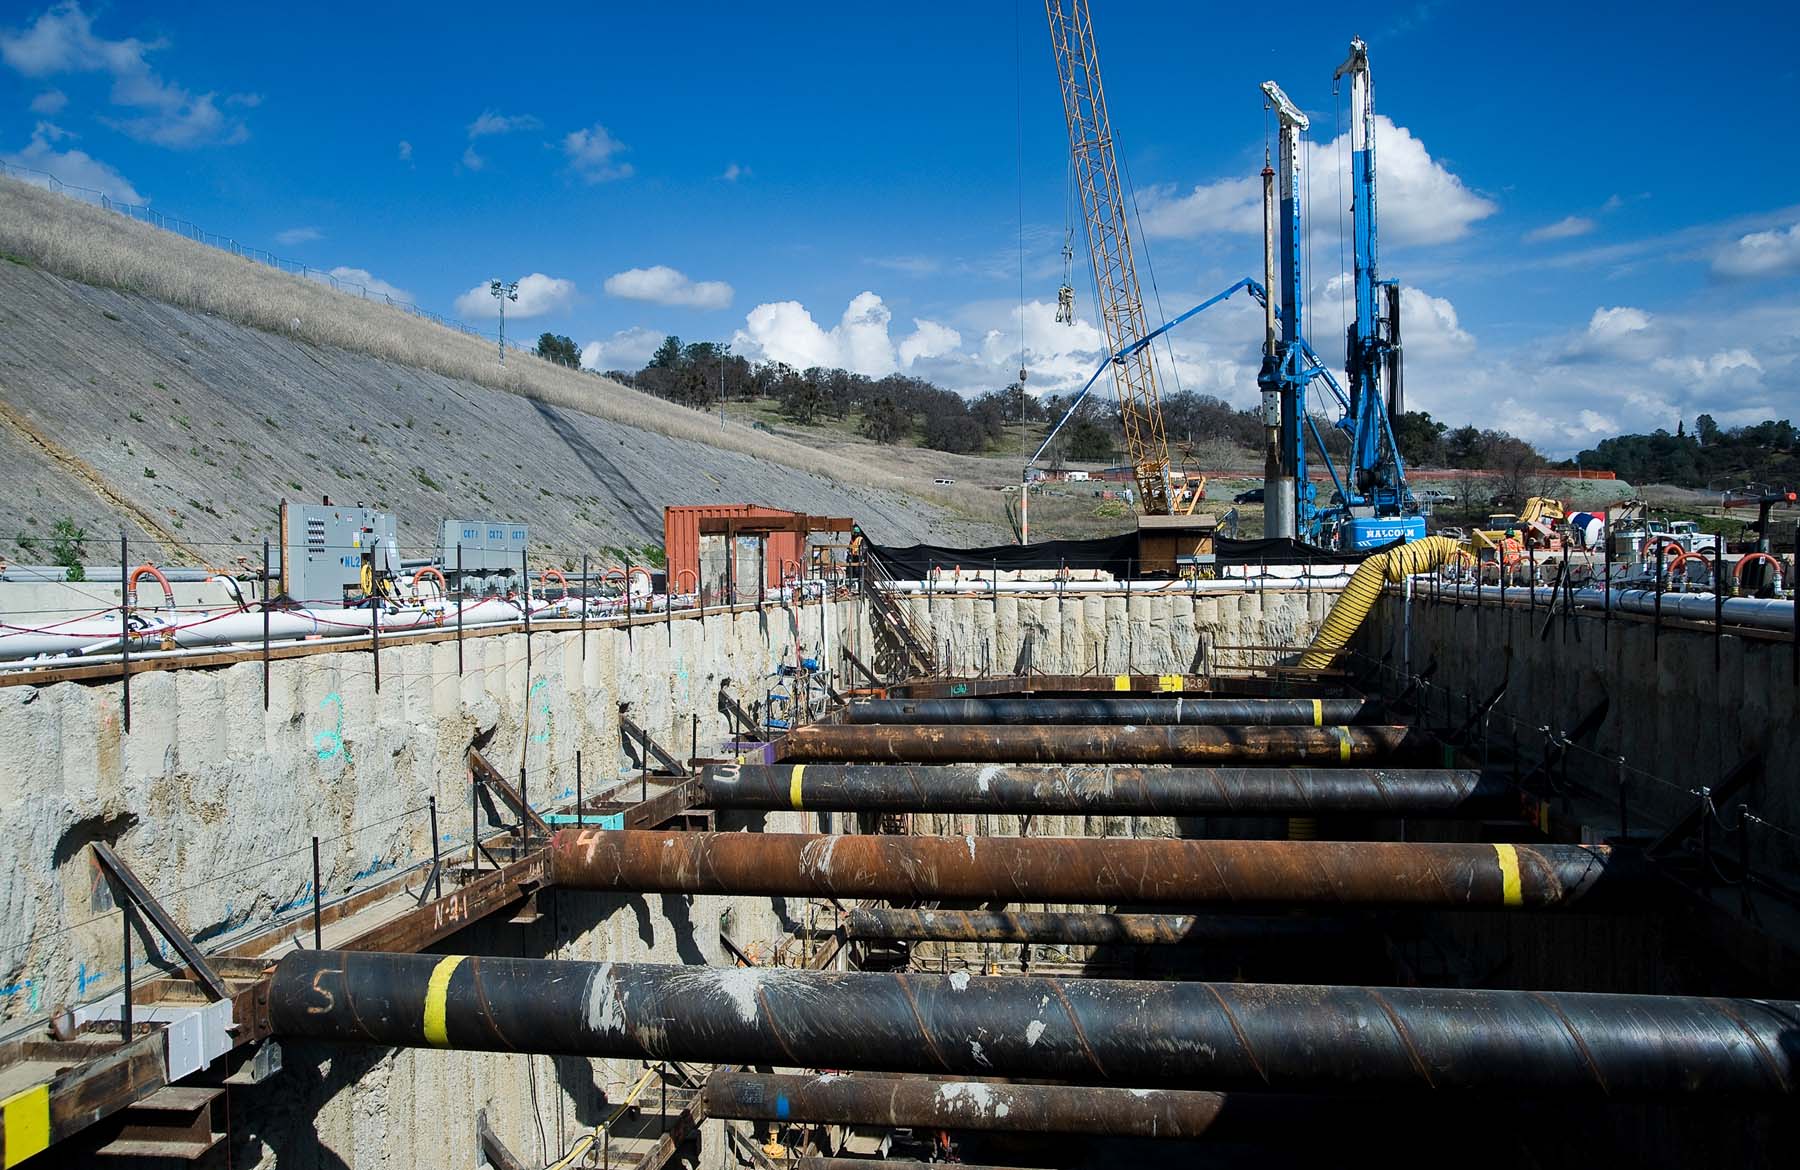 Earthquake Resilience: Malcolm's Secant Pile Expertise in Folsom Lake Dam